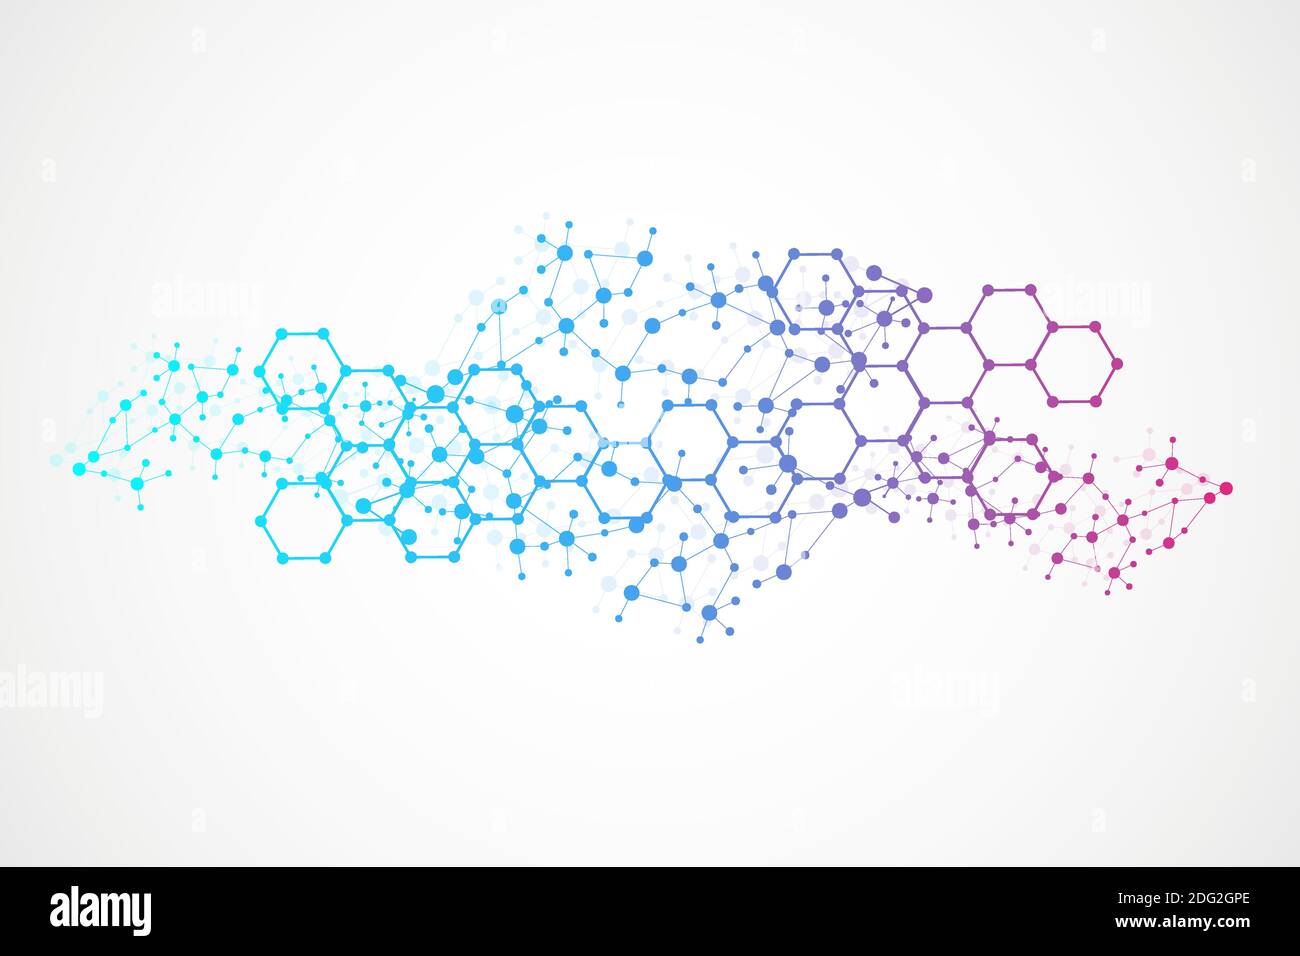 Structure molecule and communication. Dna, atom, neurons. Scientific concept for your design. Connected lines with dots. Medical, technology Stock Vector